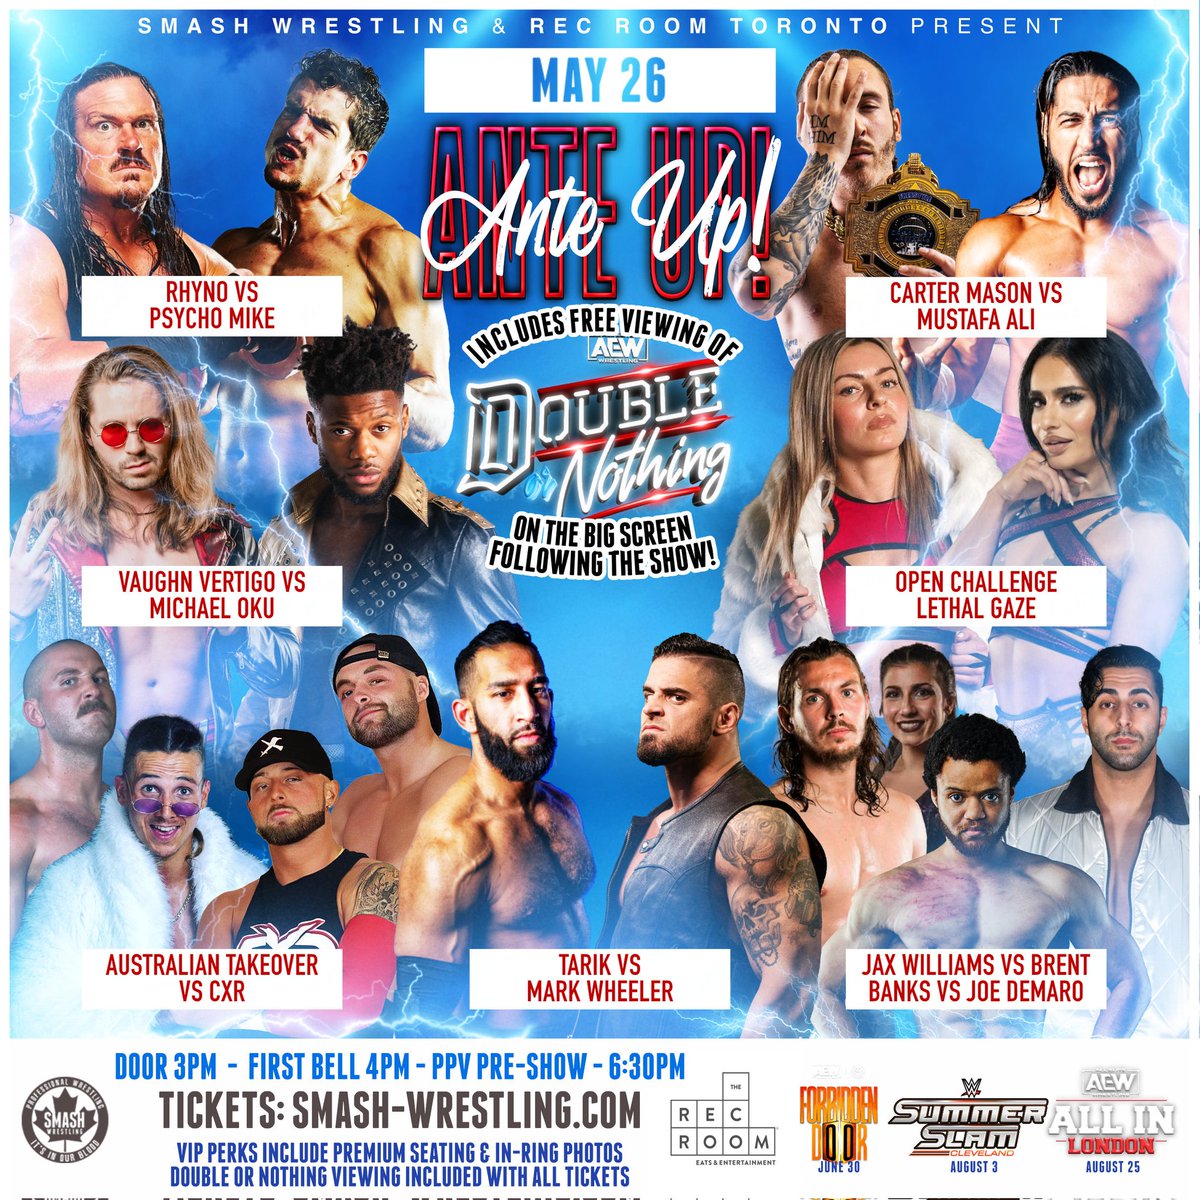 🚨6 DAYS OUT🚨 May 26 ft. @MustafaAli_X A new fan experience for Toronto wrestling fans Big live events Big headliners Big PPVs on the... Big screen Regular dates, all on major PPV dates The ultimate pro wrestling fan experience at The Rec Room! 🎟️ smash-wrestling.com